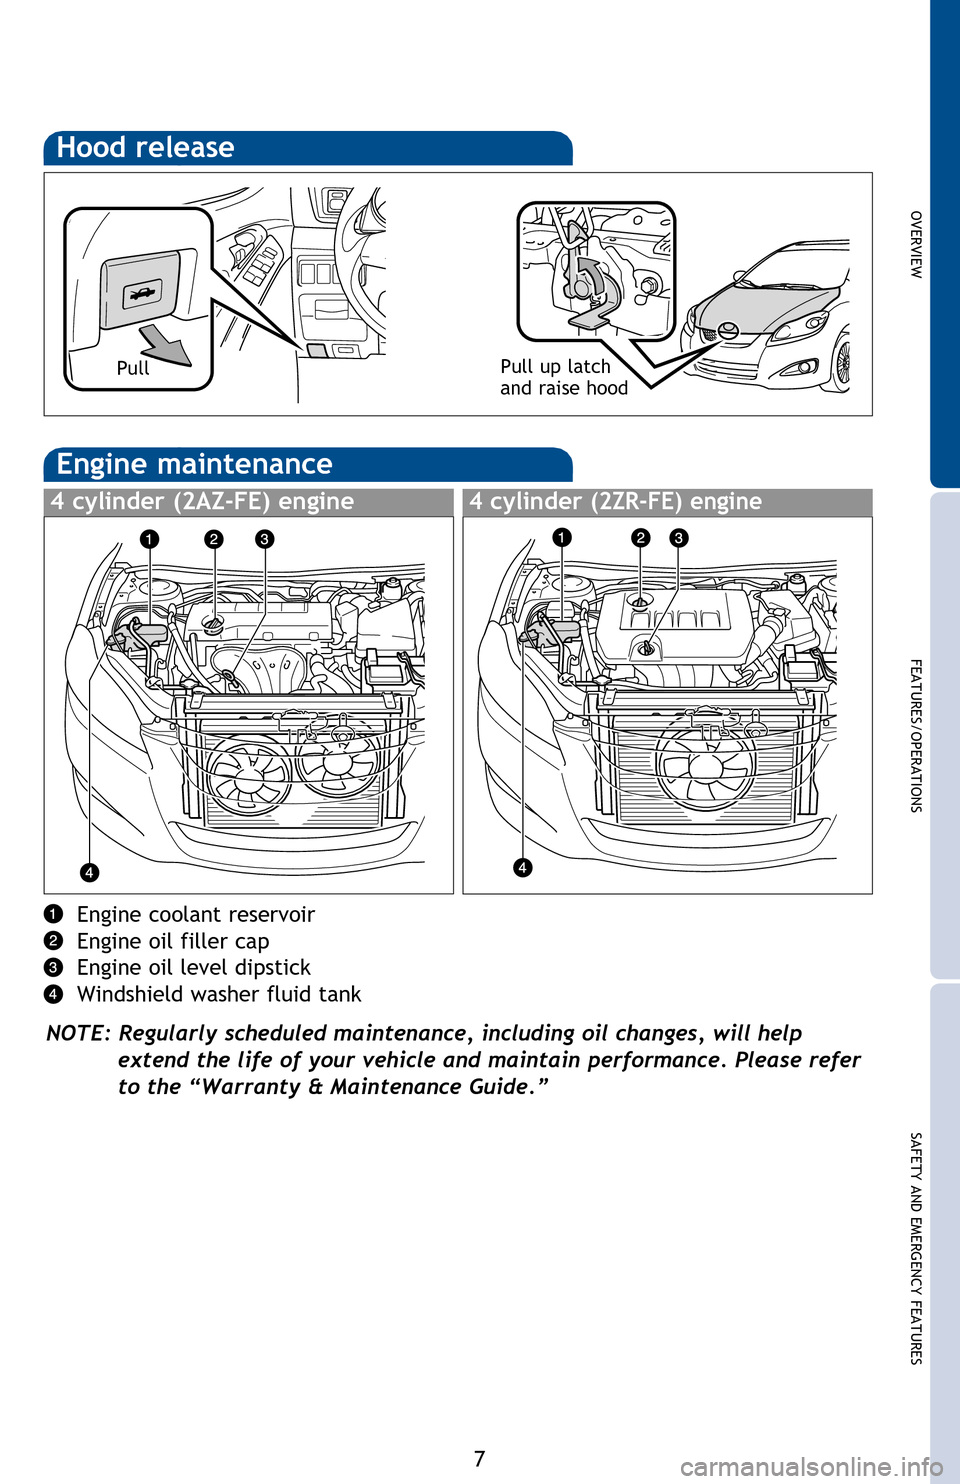 TOYOTA MATRIX 2013 E140 / 2.G Quick Reference Guide 
OVERVIEW
FEATURES/OPERATIONS
SAFETY AND EMERGENCY FEATURES
7
Unlocking operation
NOTE: If a door is not opened within 60 
seconds of unlocking, all doors will relock 
for safety.
Hood release
Pull up